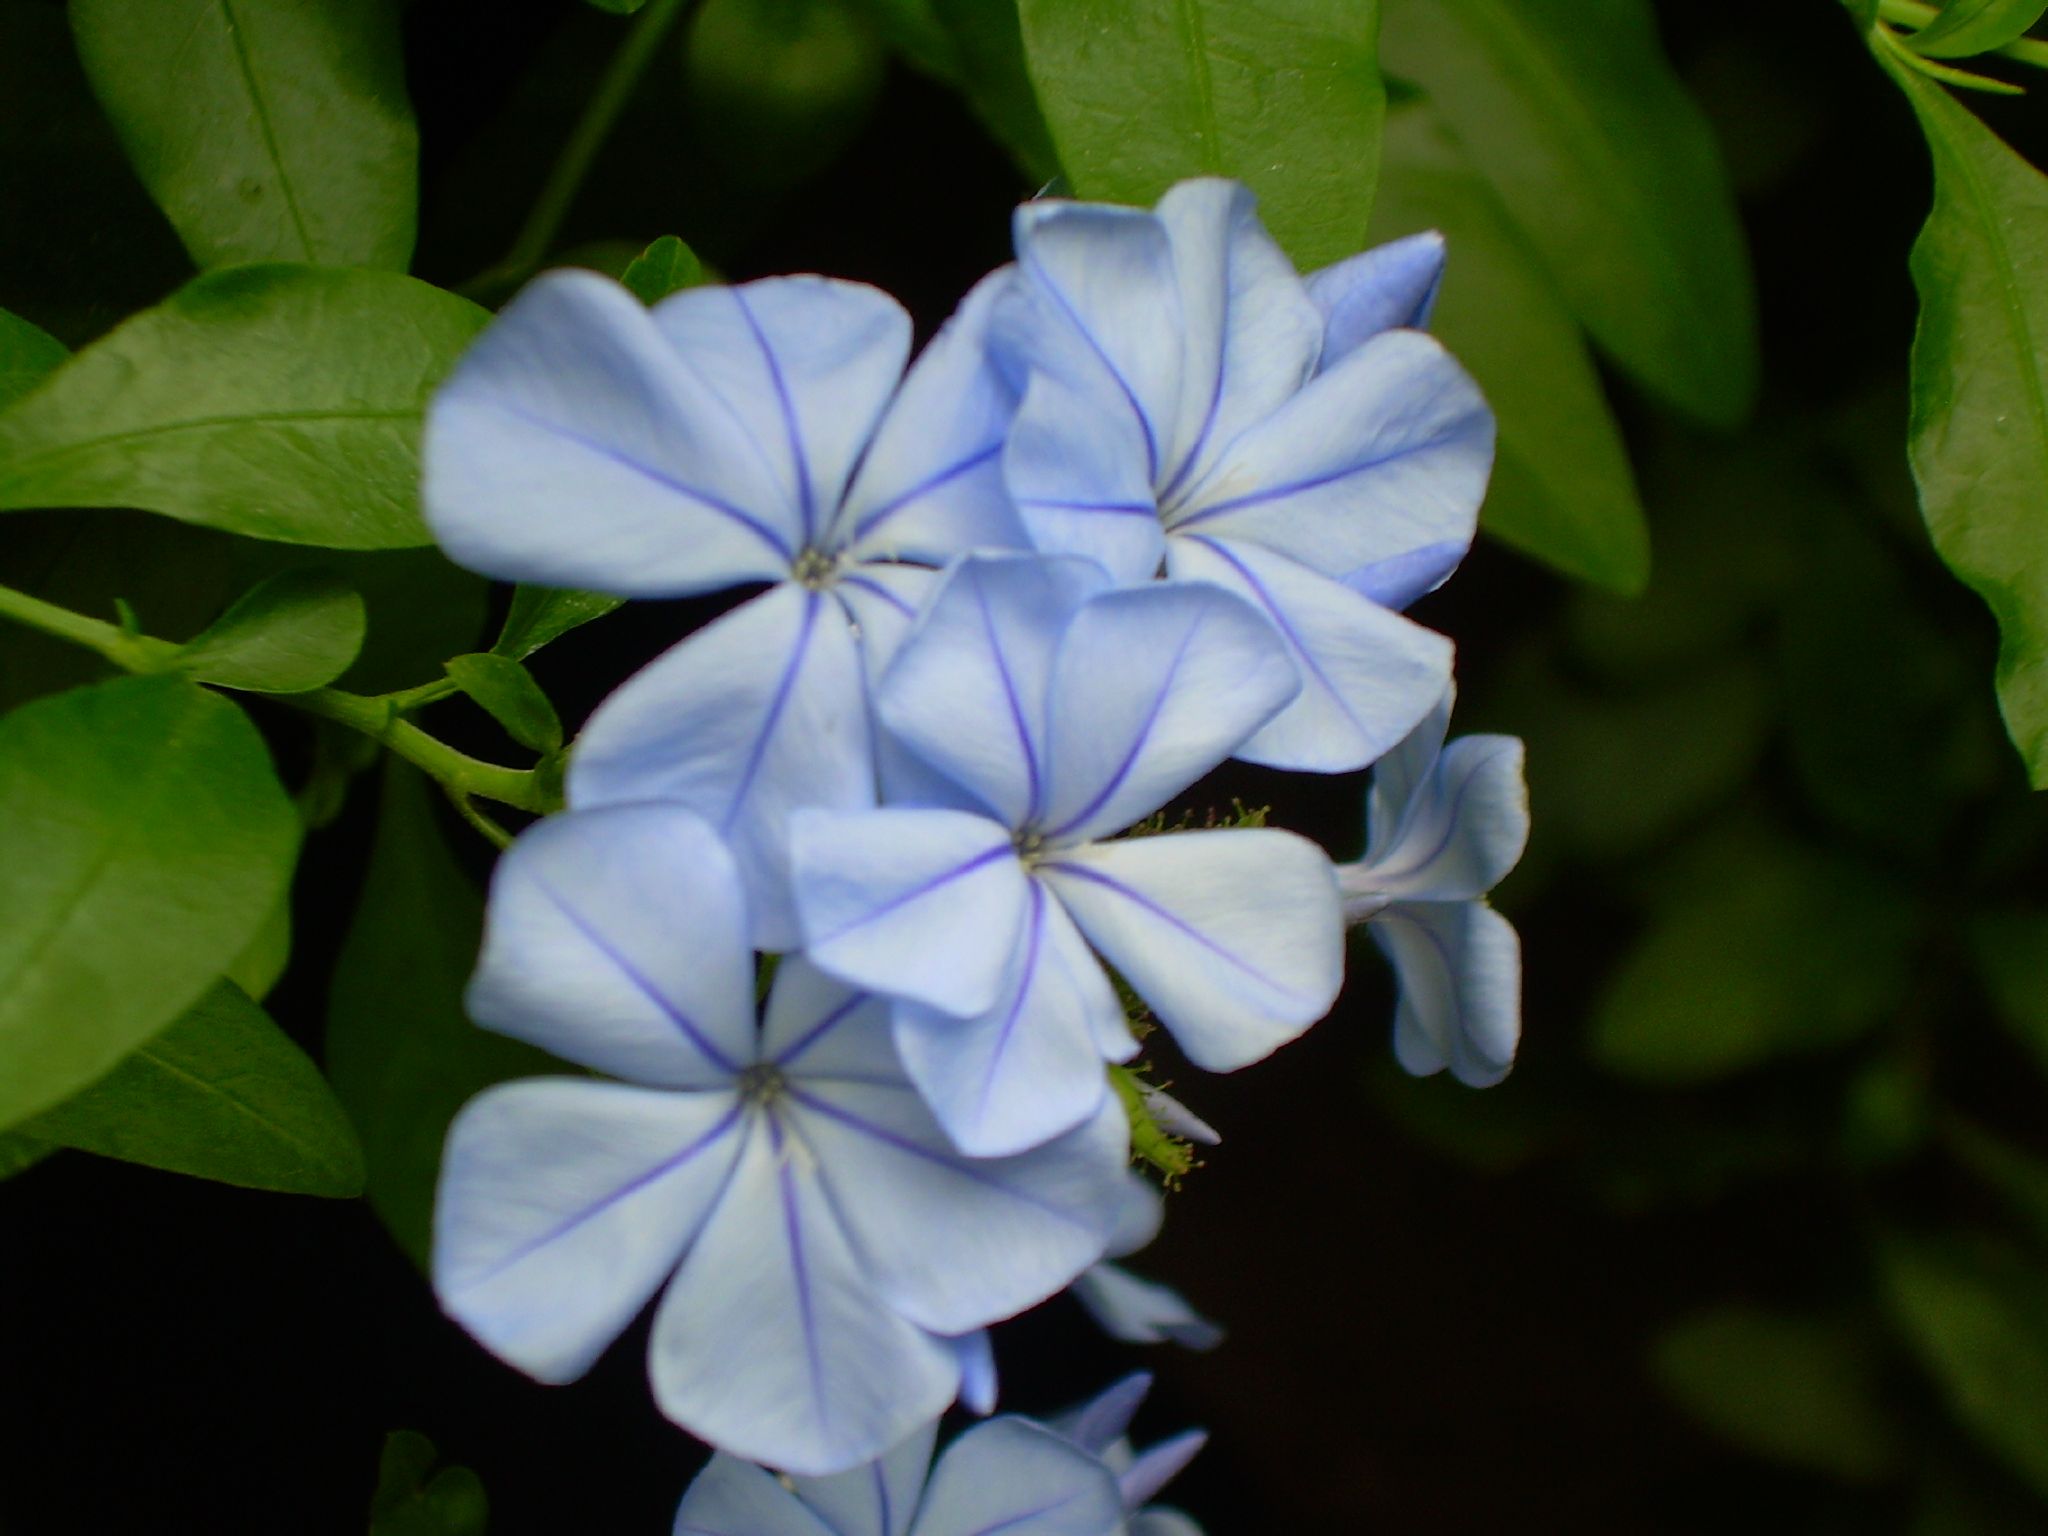 four blue flowers are pictured in this image